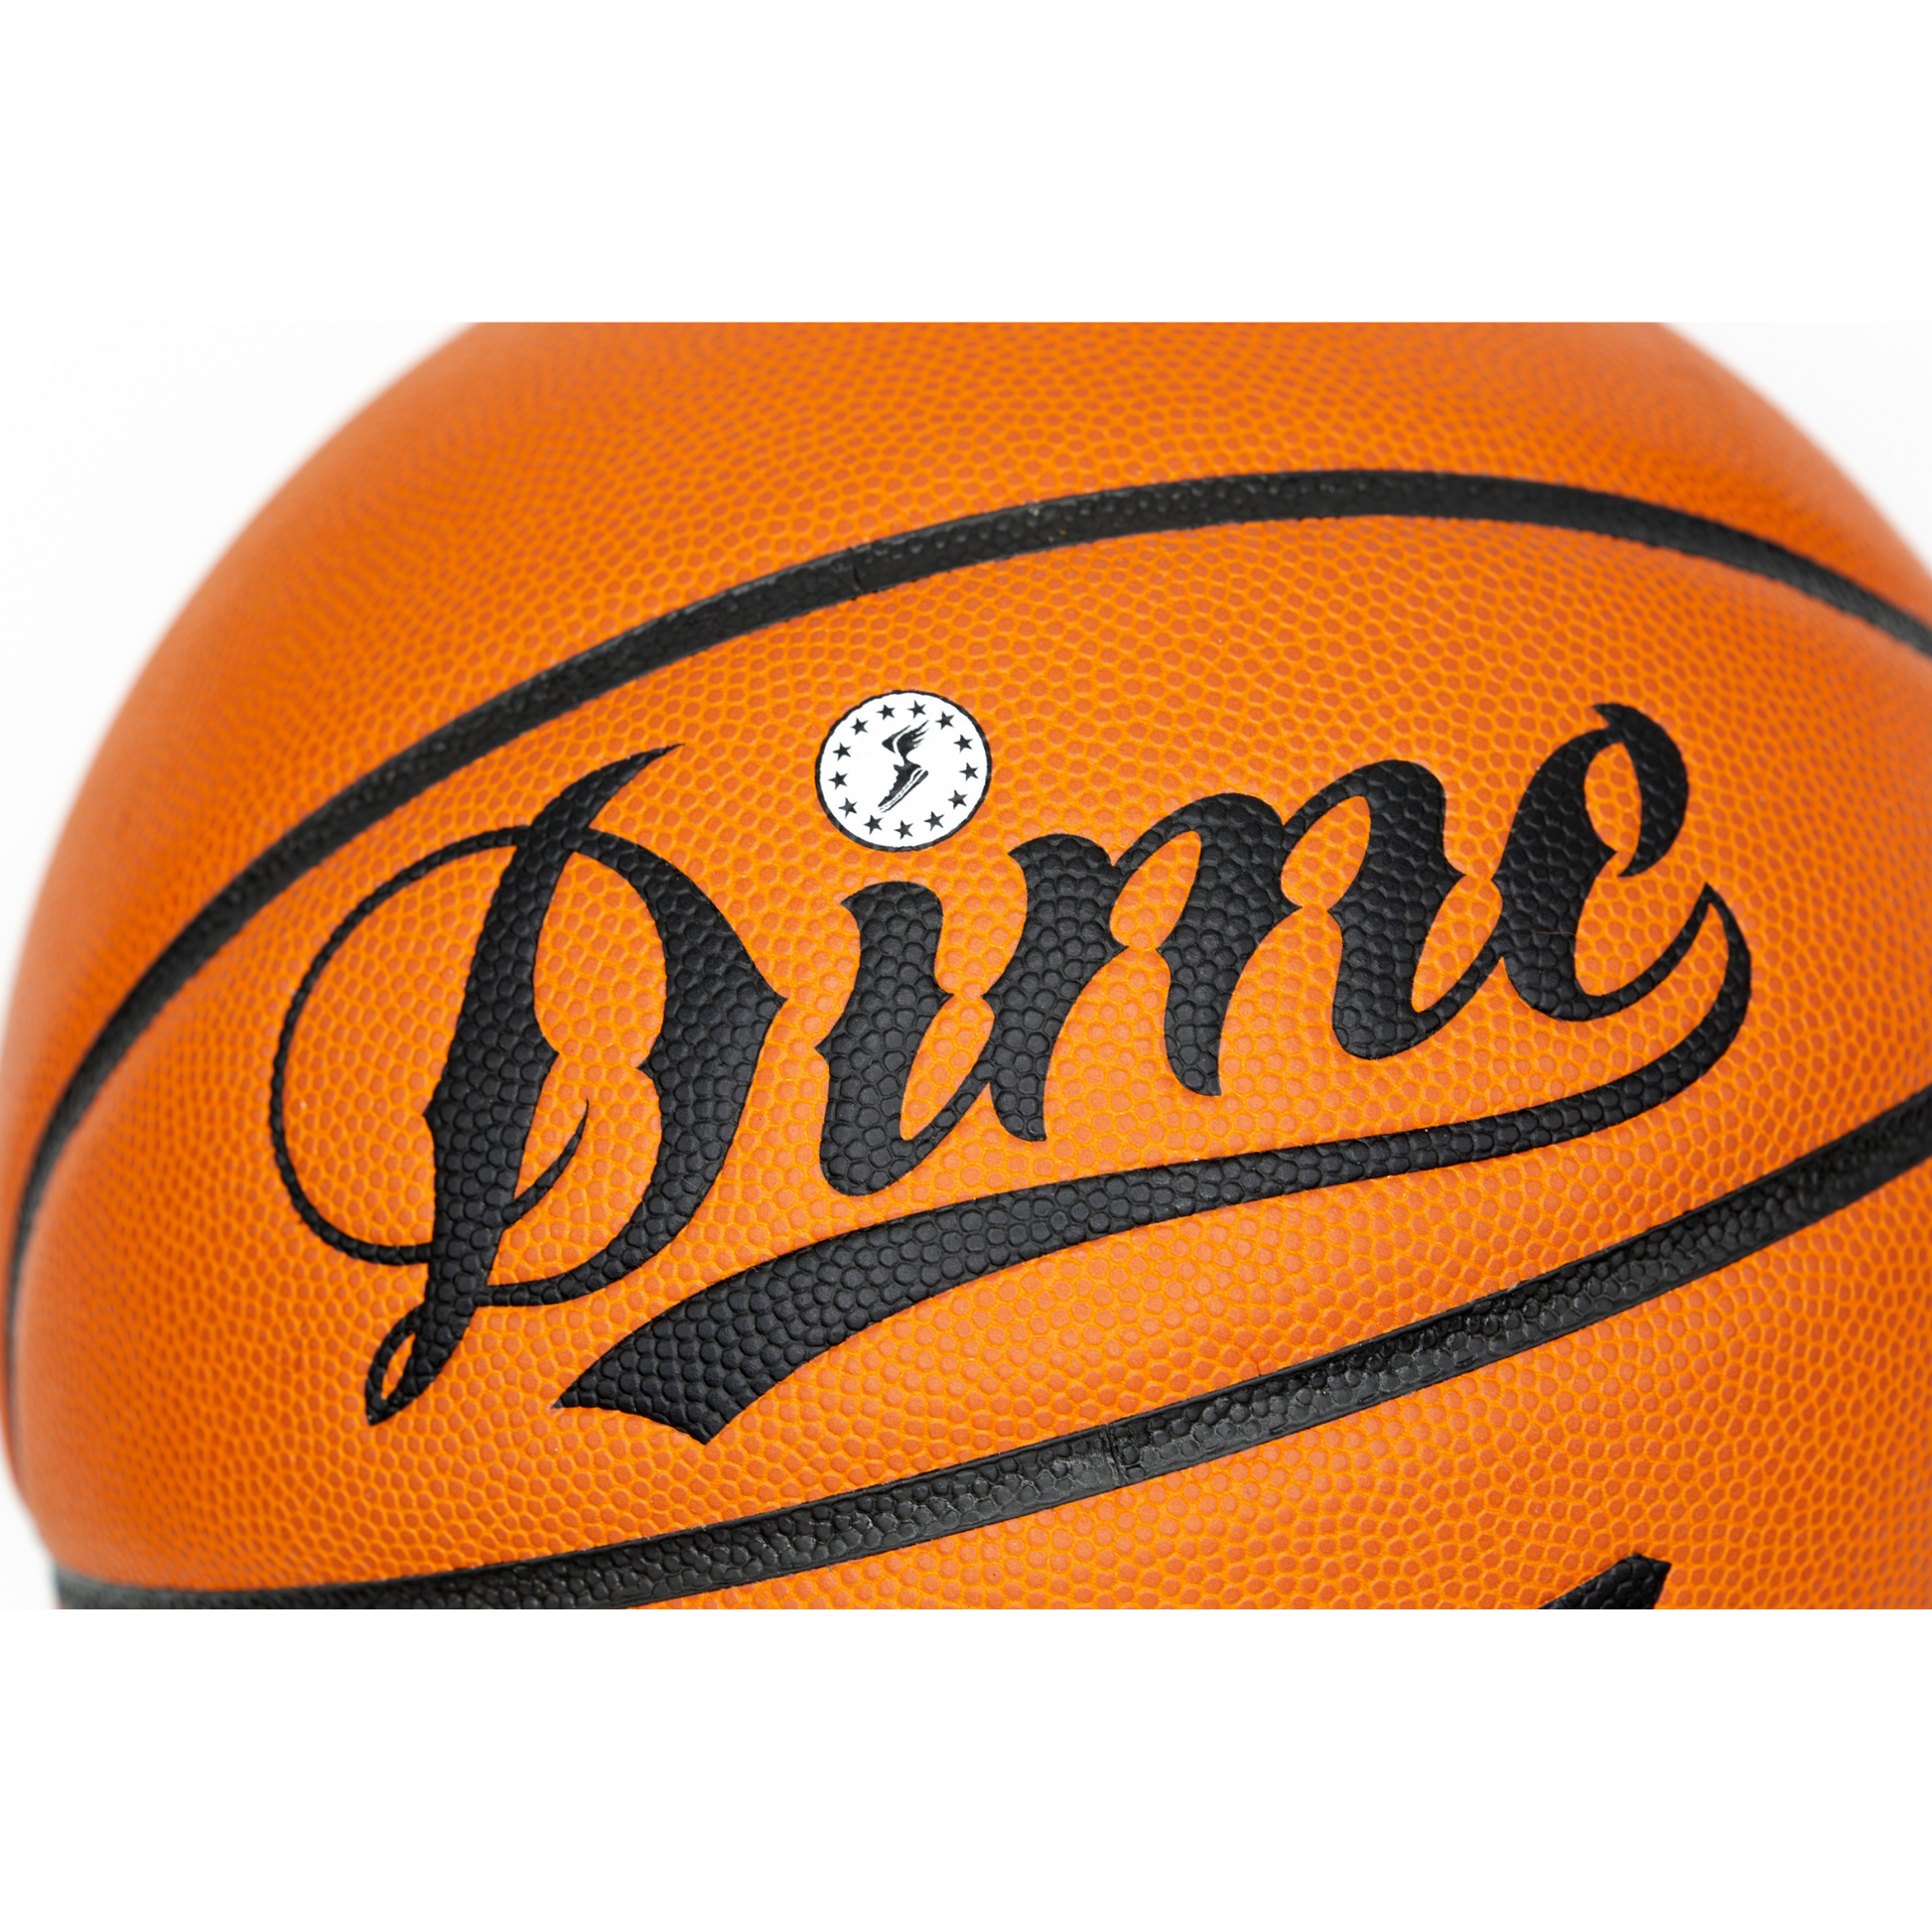 Best Outdoor Basketballs for 2023: Performance Meets Durability